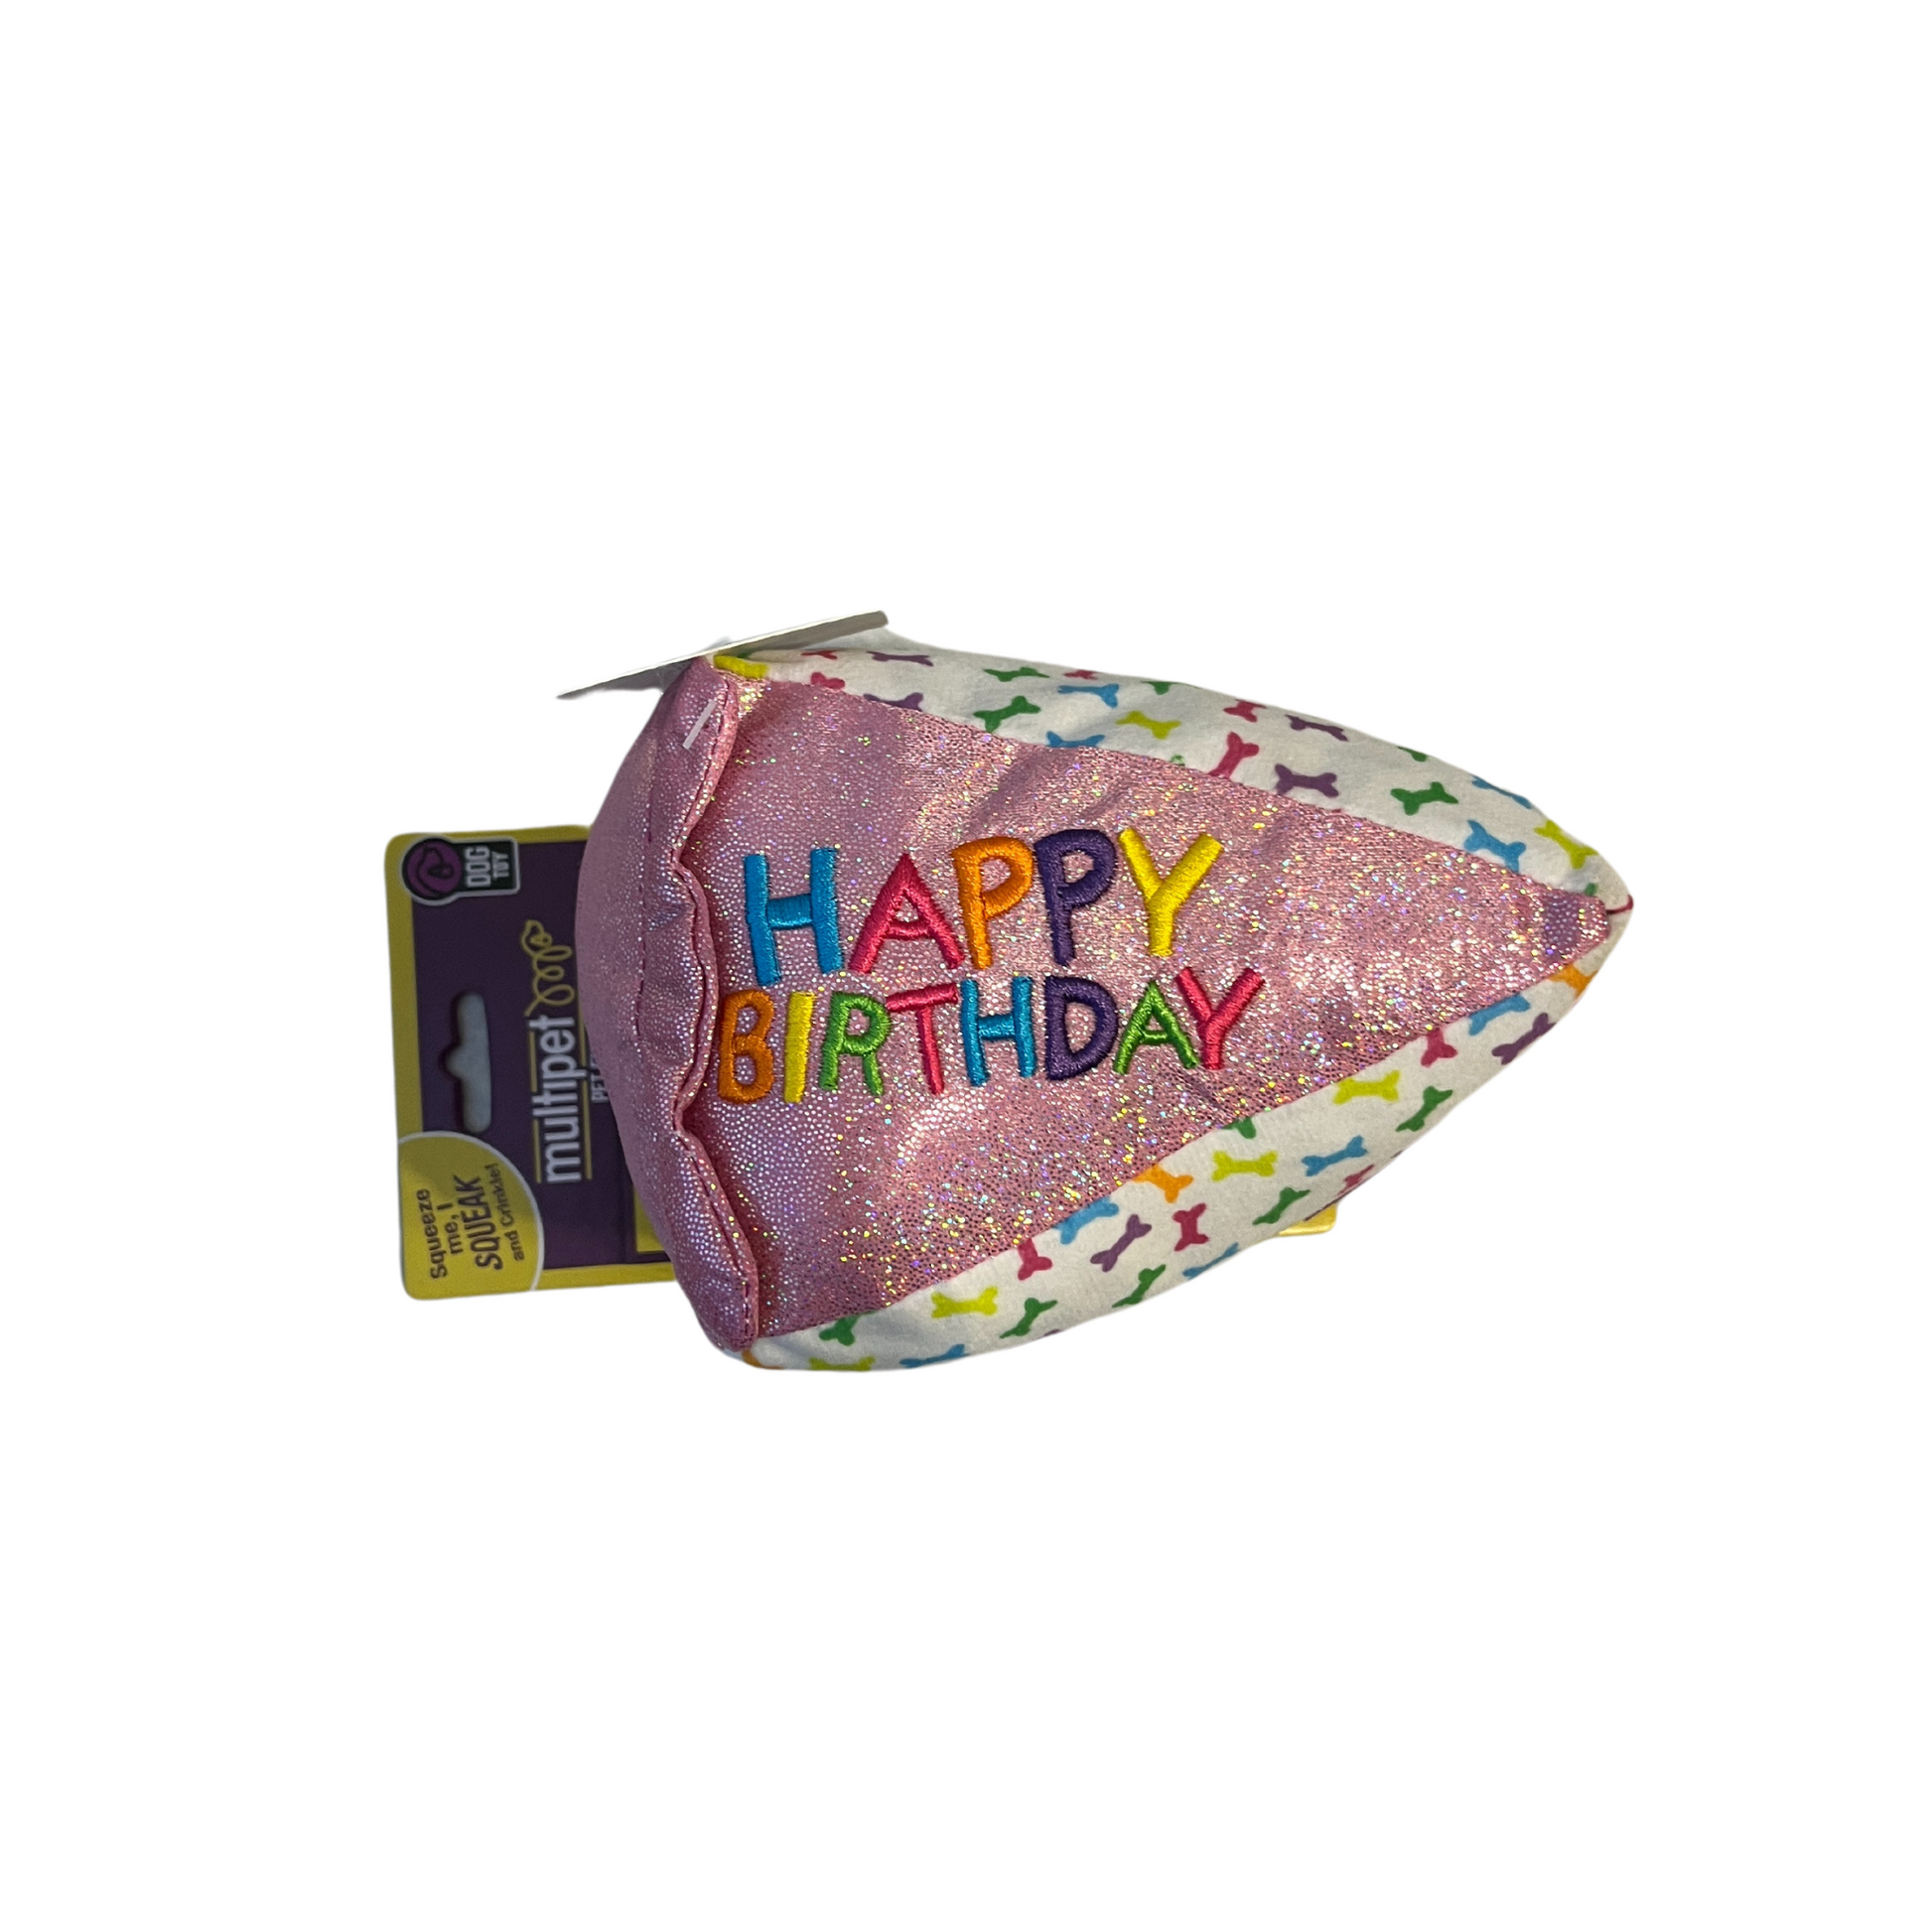 Top view of Multipet Pink Birthday Cake Slice Dog Toy. Top reads, "Happy Birthday". 